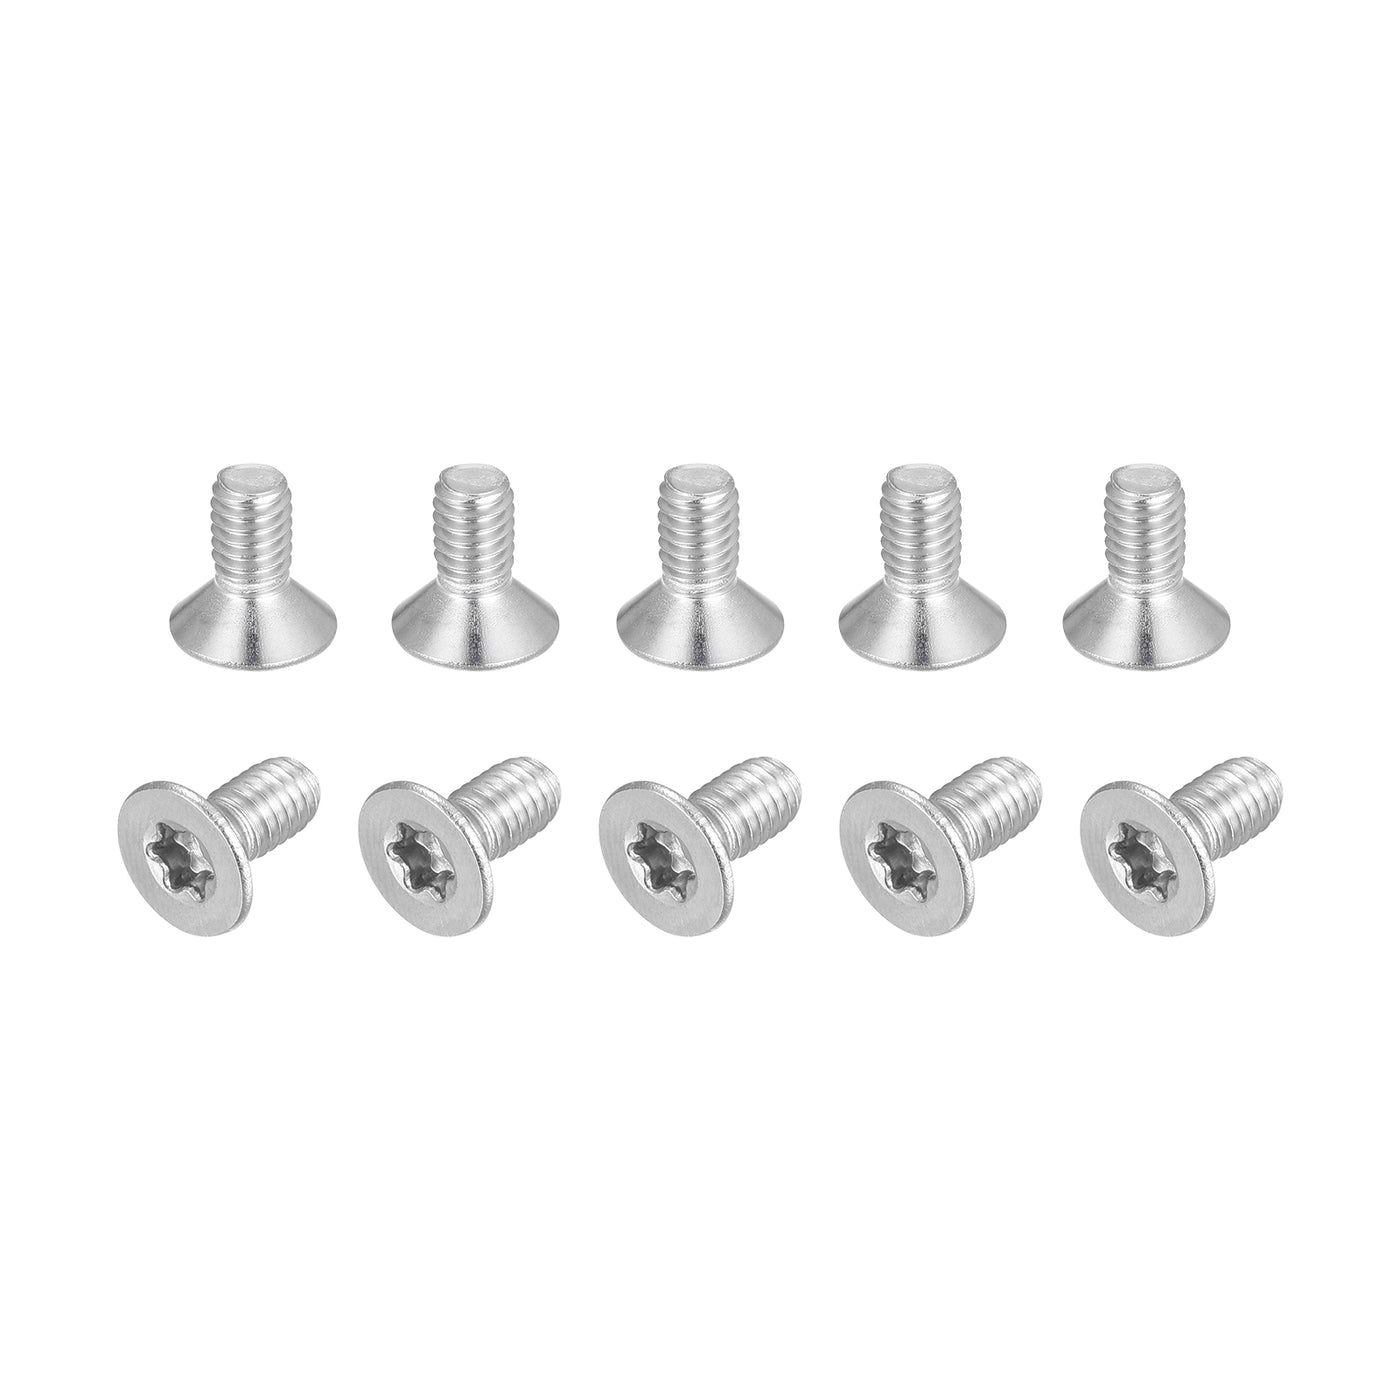 uxcell Uxcell M4x8mm Torx Security Screws, 10pcs 316 Stainless Steel Countersunk Head Screw